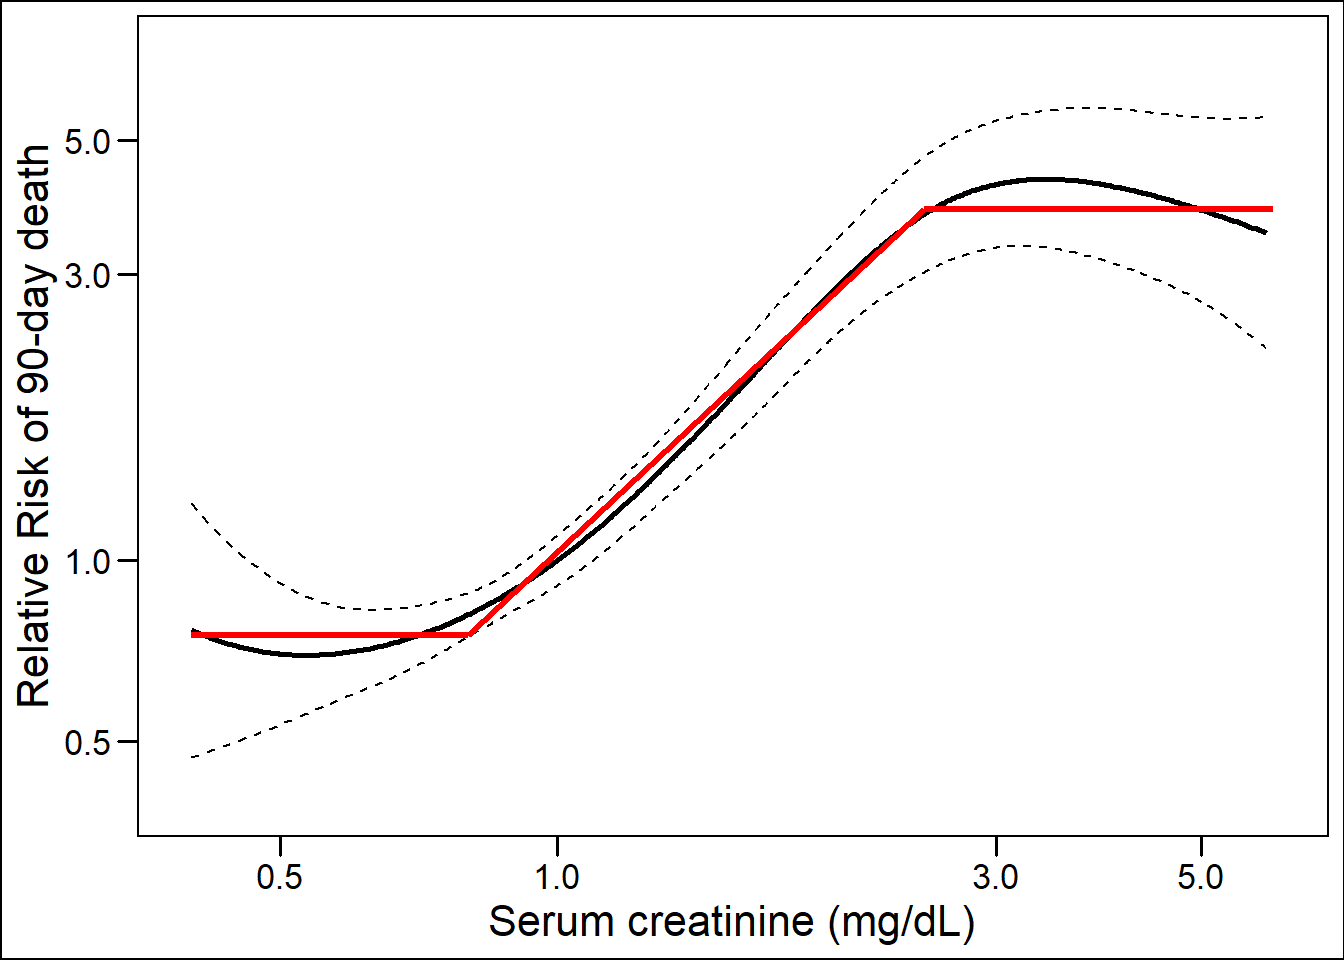 For each parameter, the diagonal line represent the coefficient (slope of the diagonal) and lower and upper boundaries (horizontal segments) in refit MELD